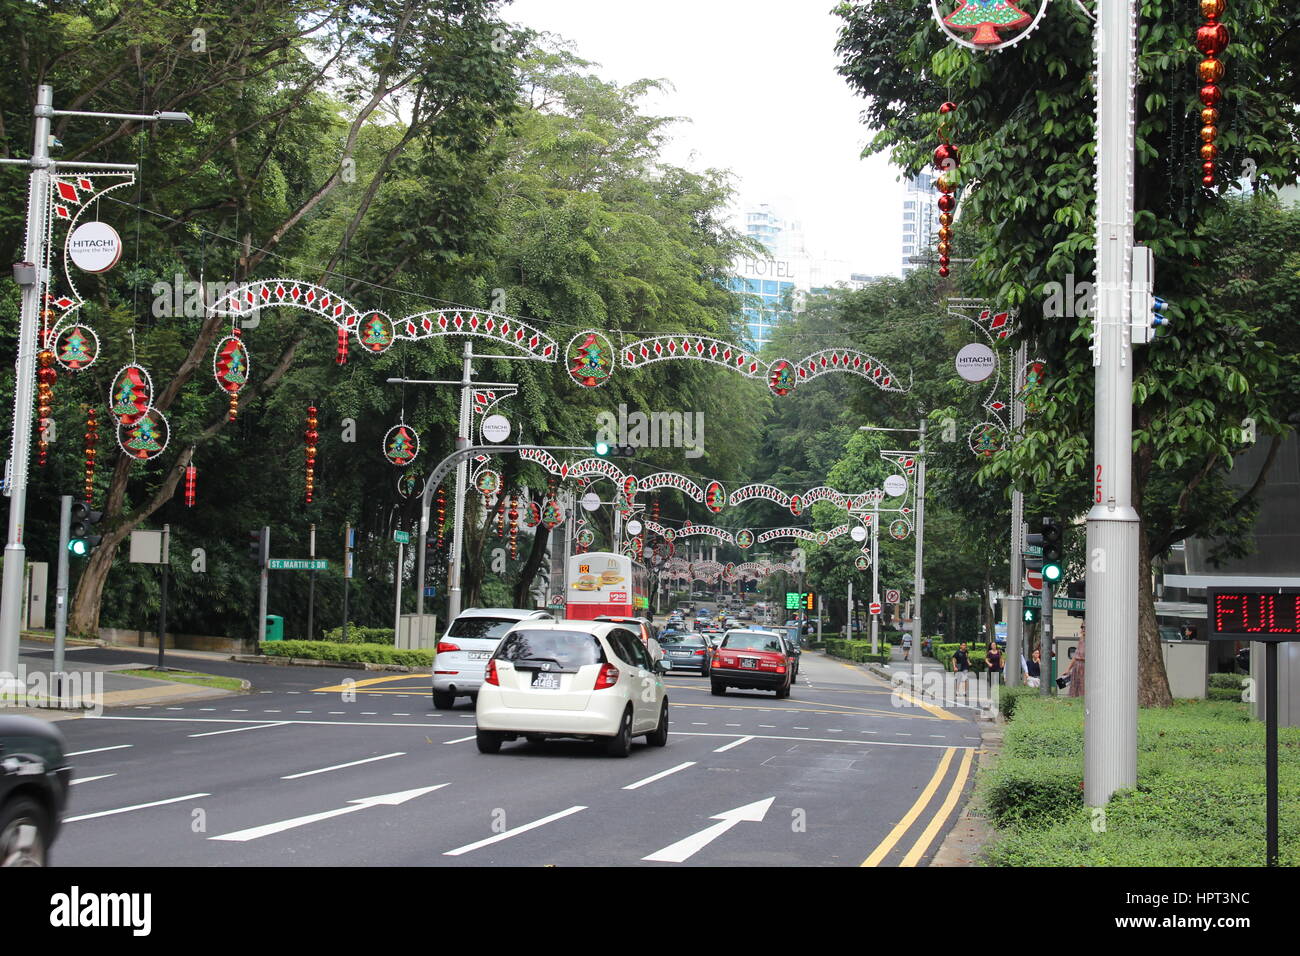 Orchard street in Singapore Stock Photo